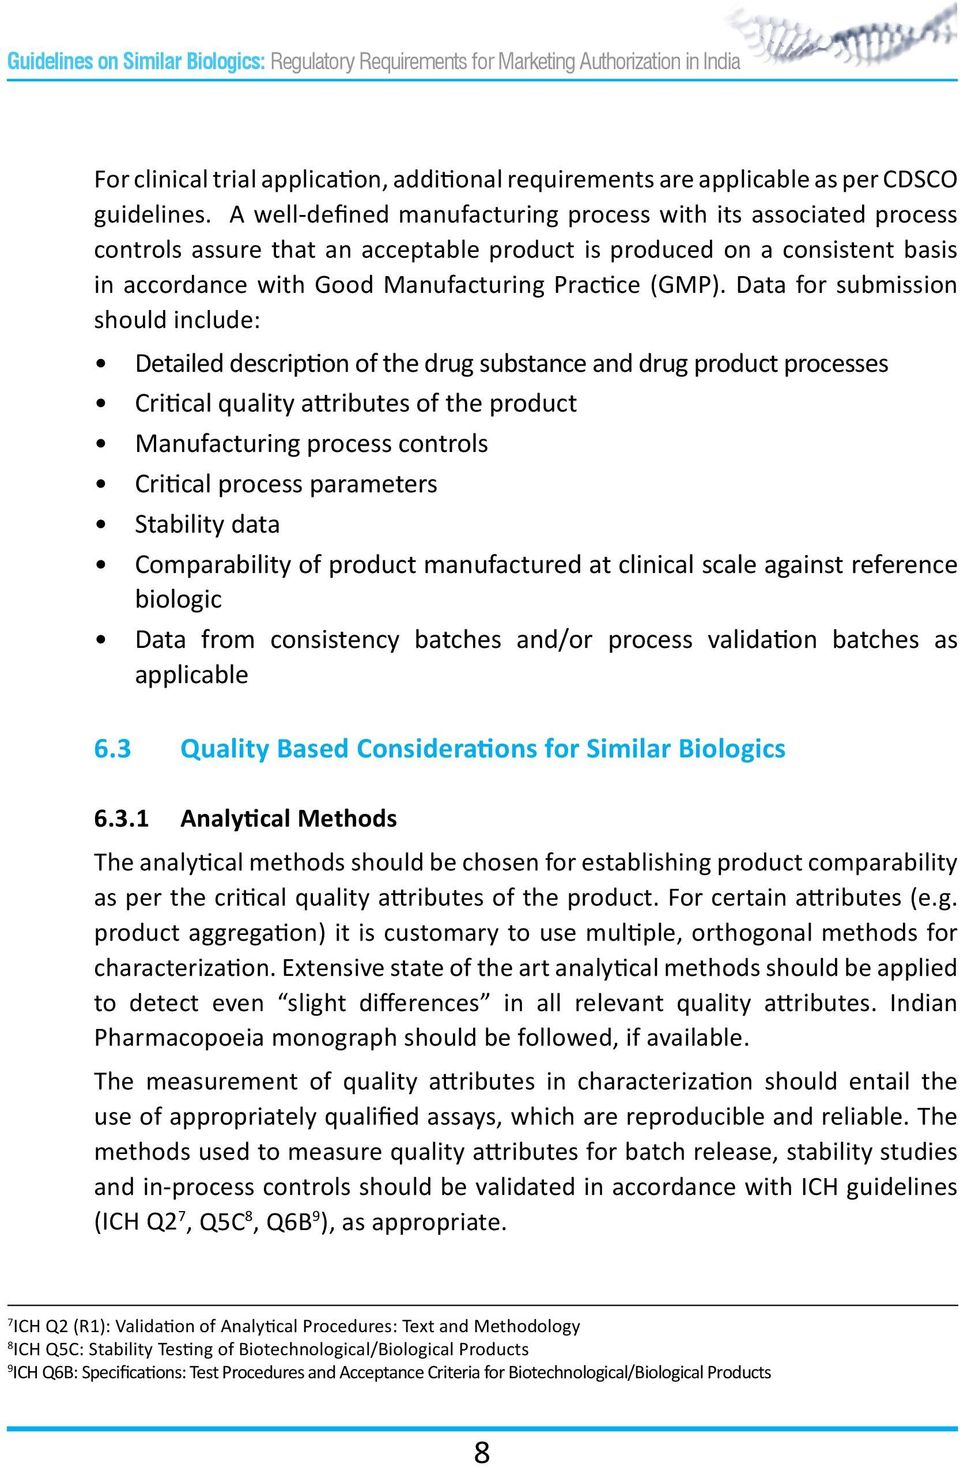 Data for submission should include: Detailed description of the drug substance and drug product processes Critical quality attributes of the product Manufacturing process controls Critical process